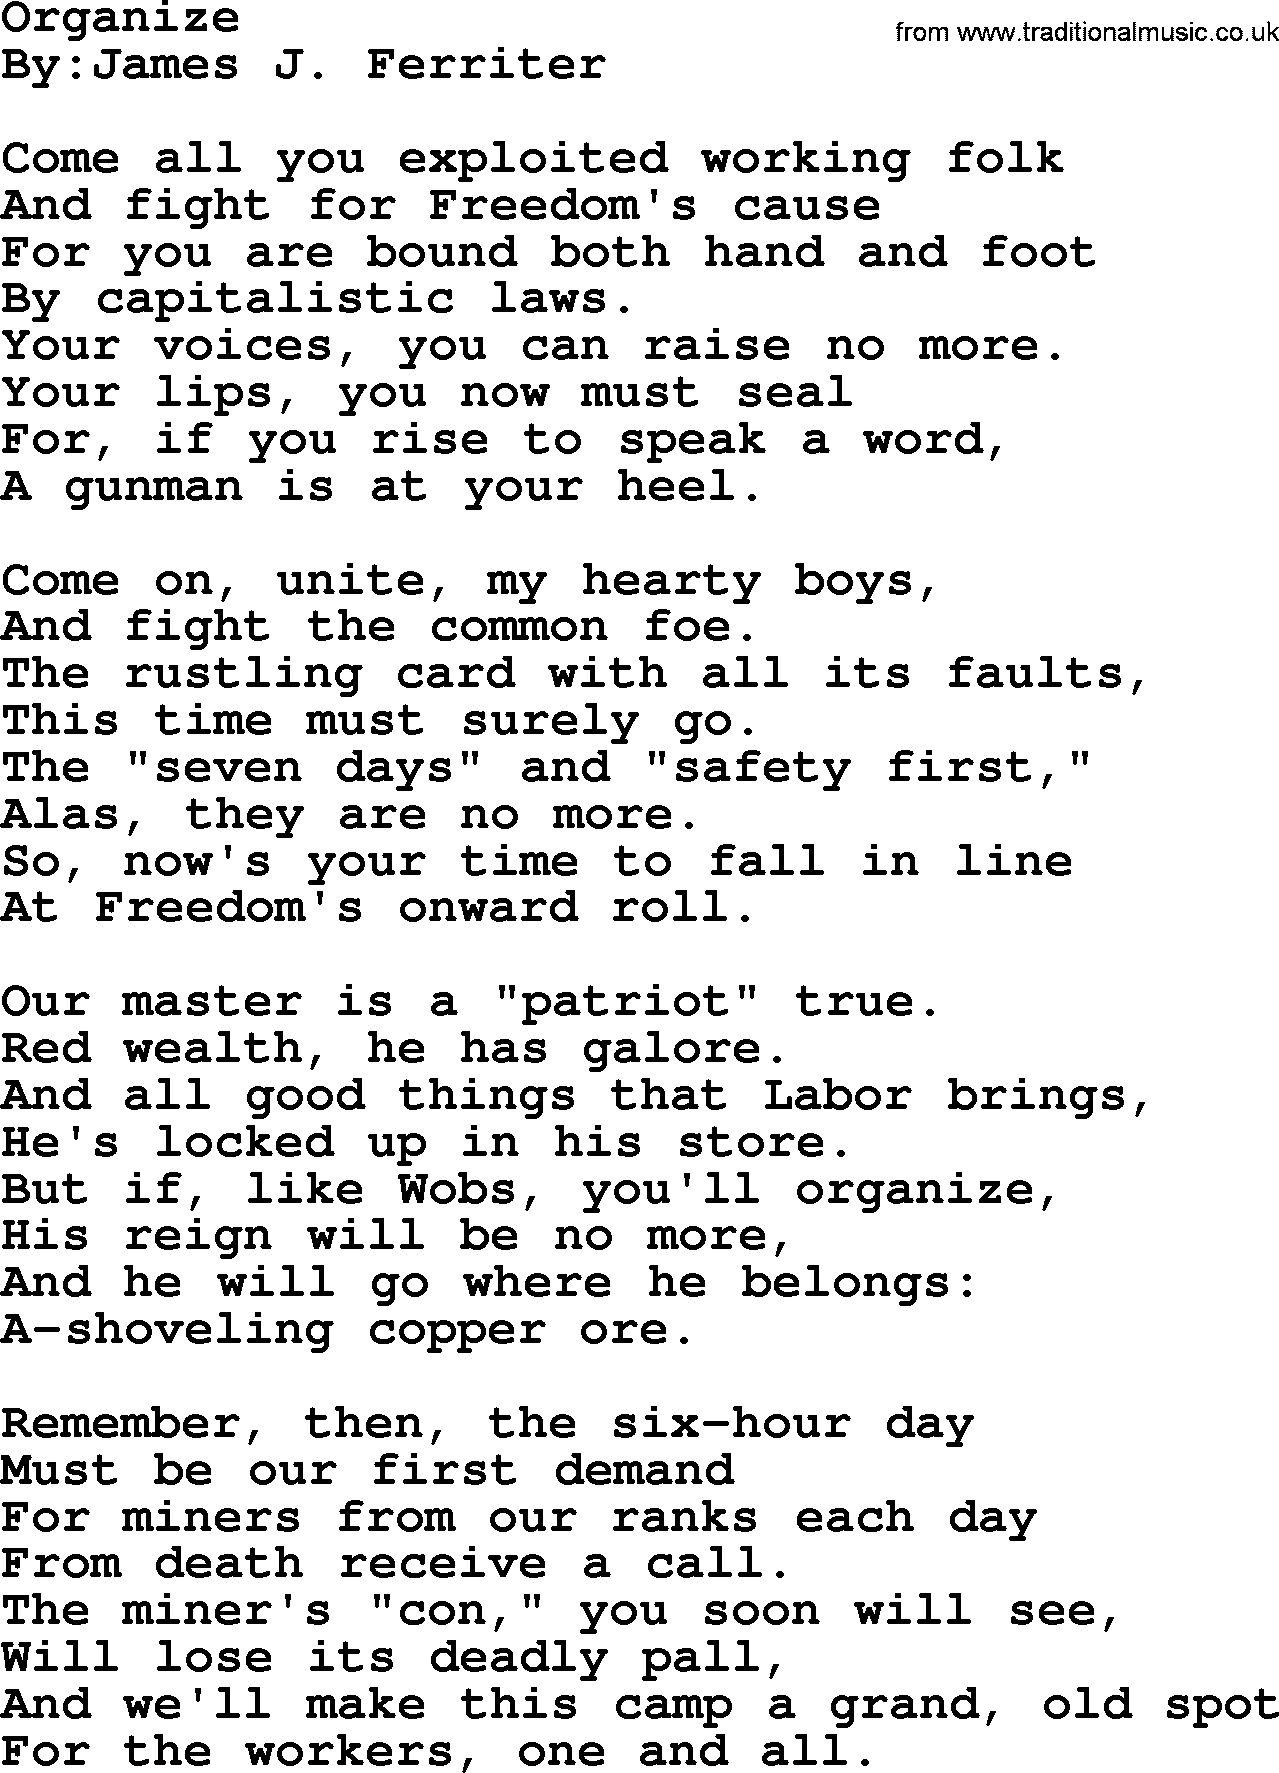 Political, Solidarity, Workers or Union song: Organize, lyrics